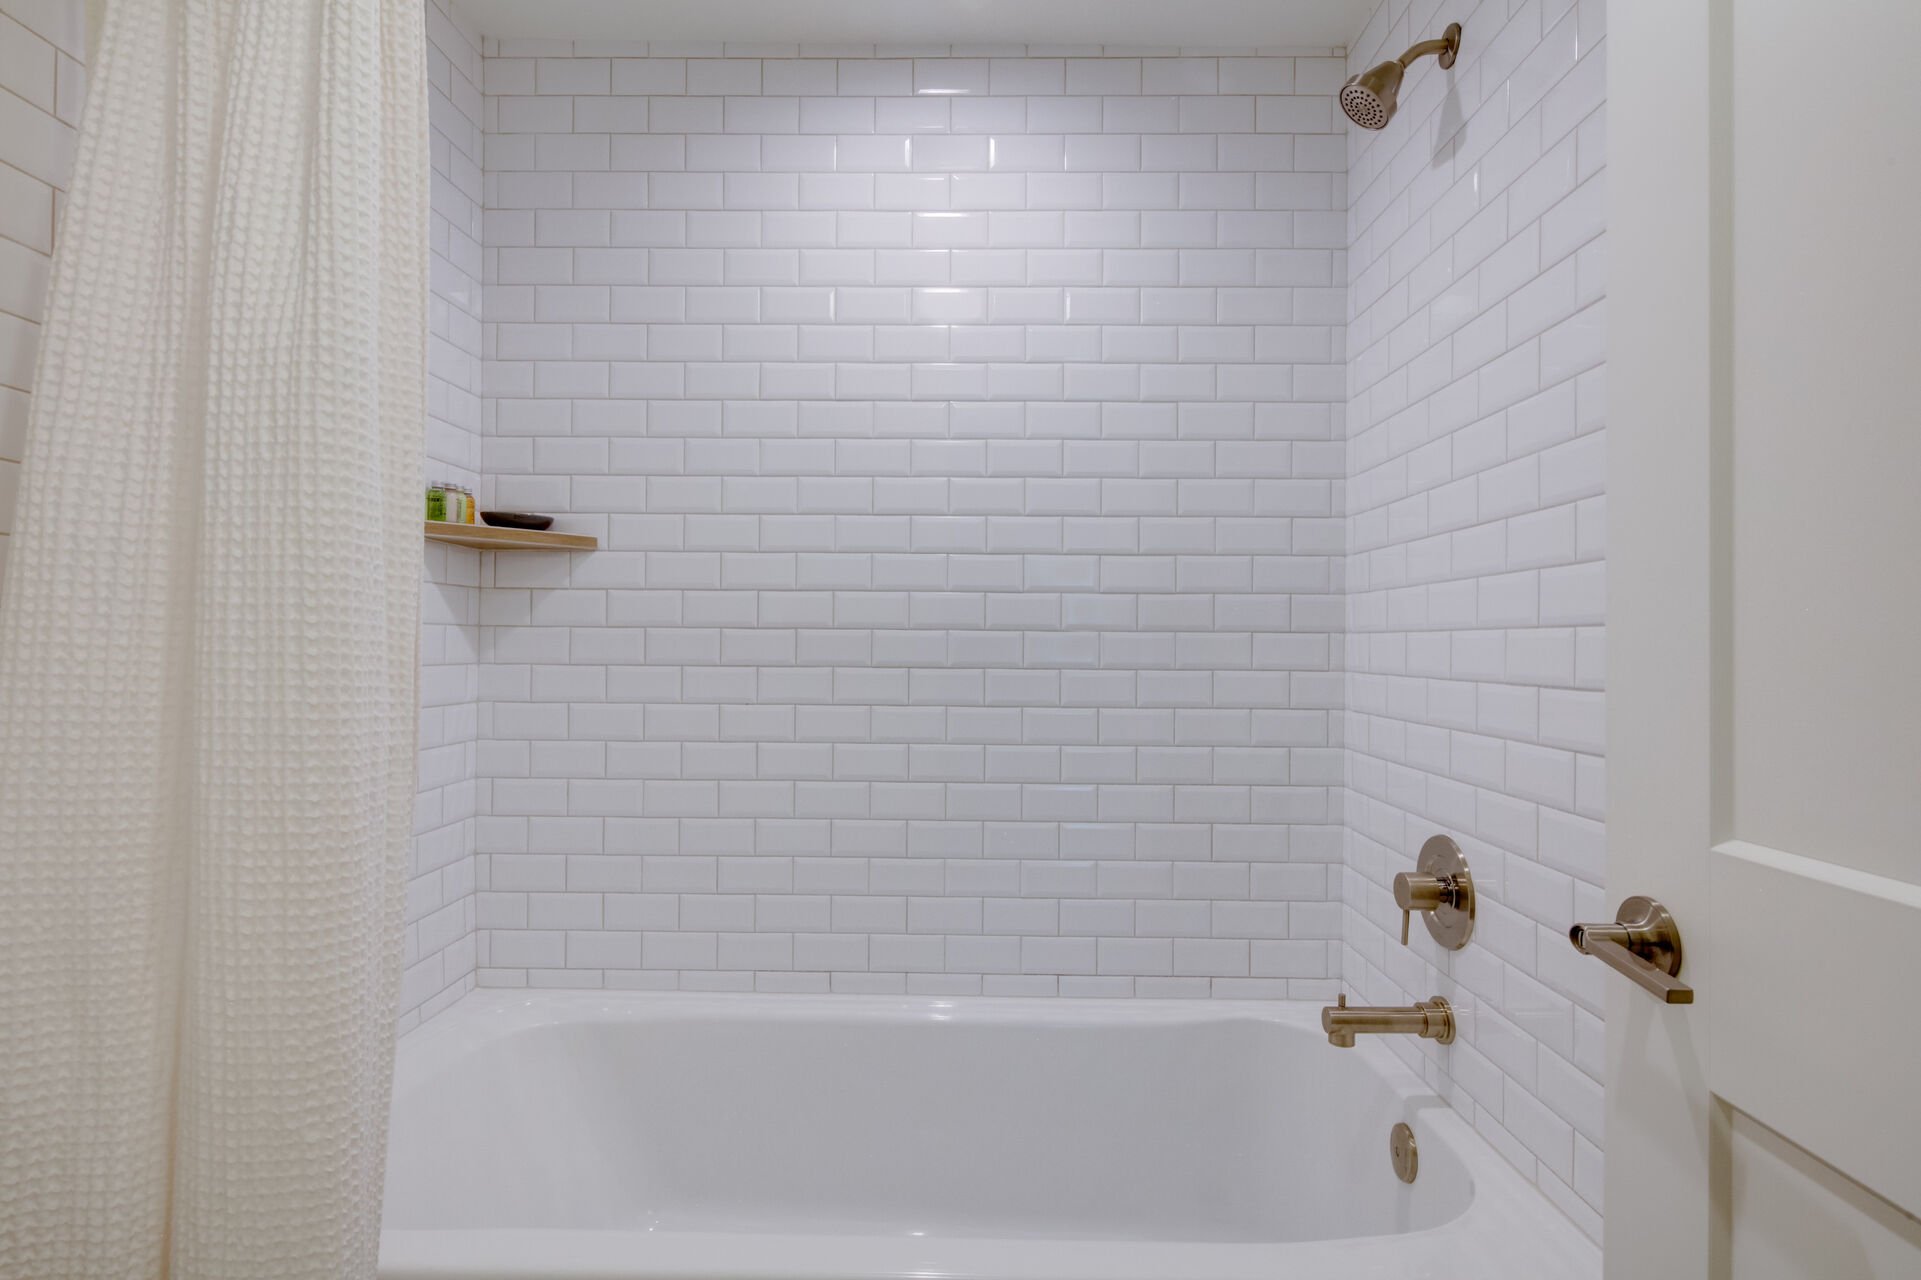 Completely Renovated Master Bath with a Quartz Counter Sink and a Tile/Glass Shower